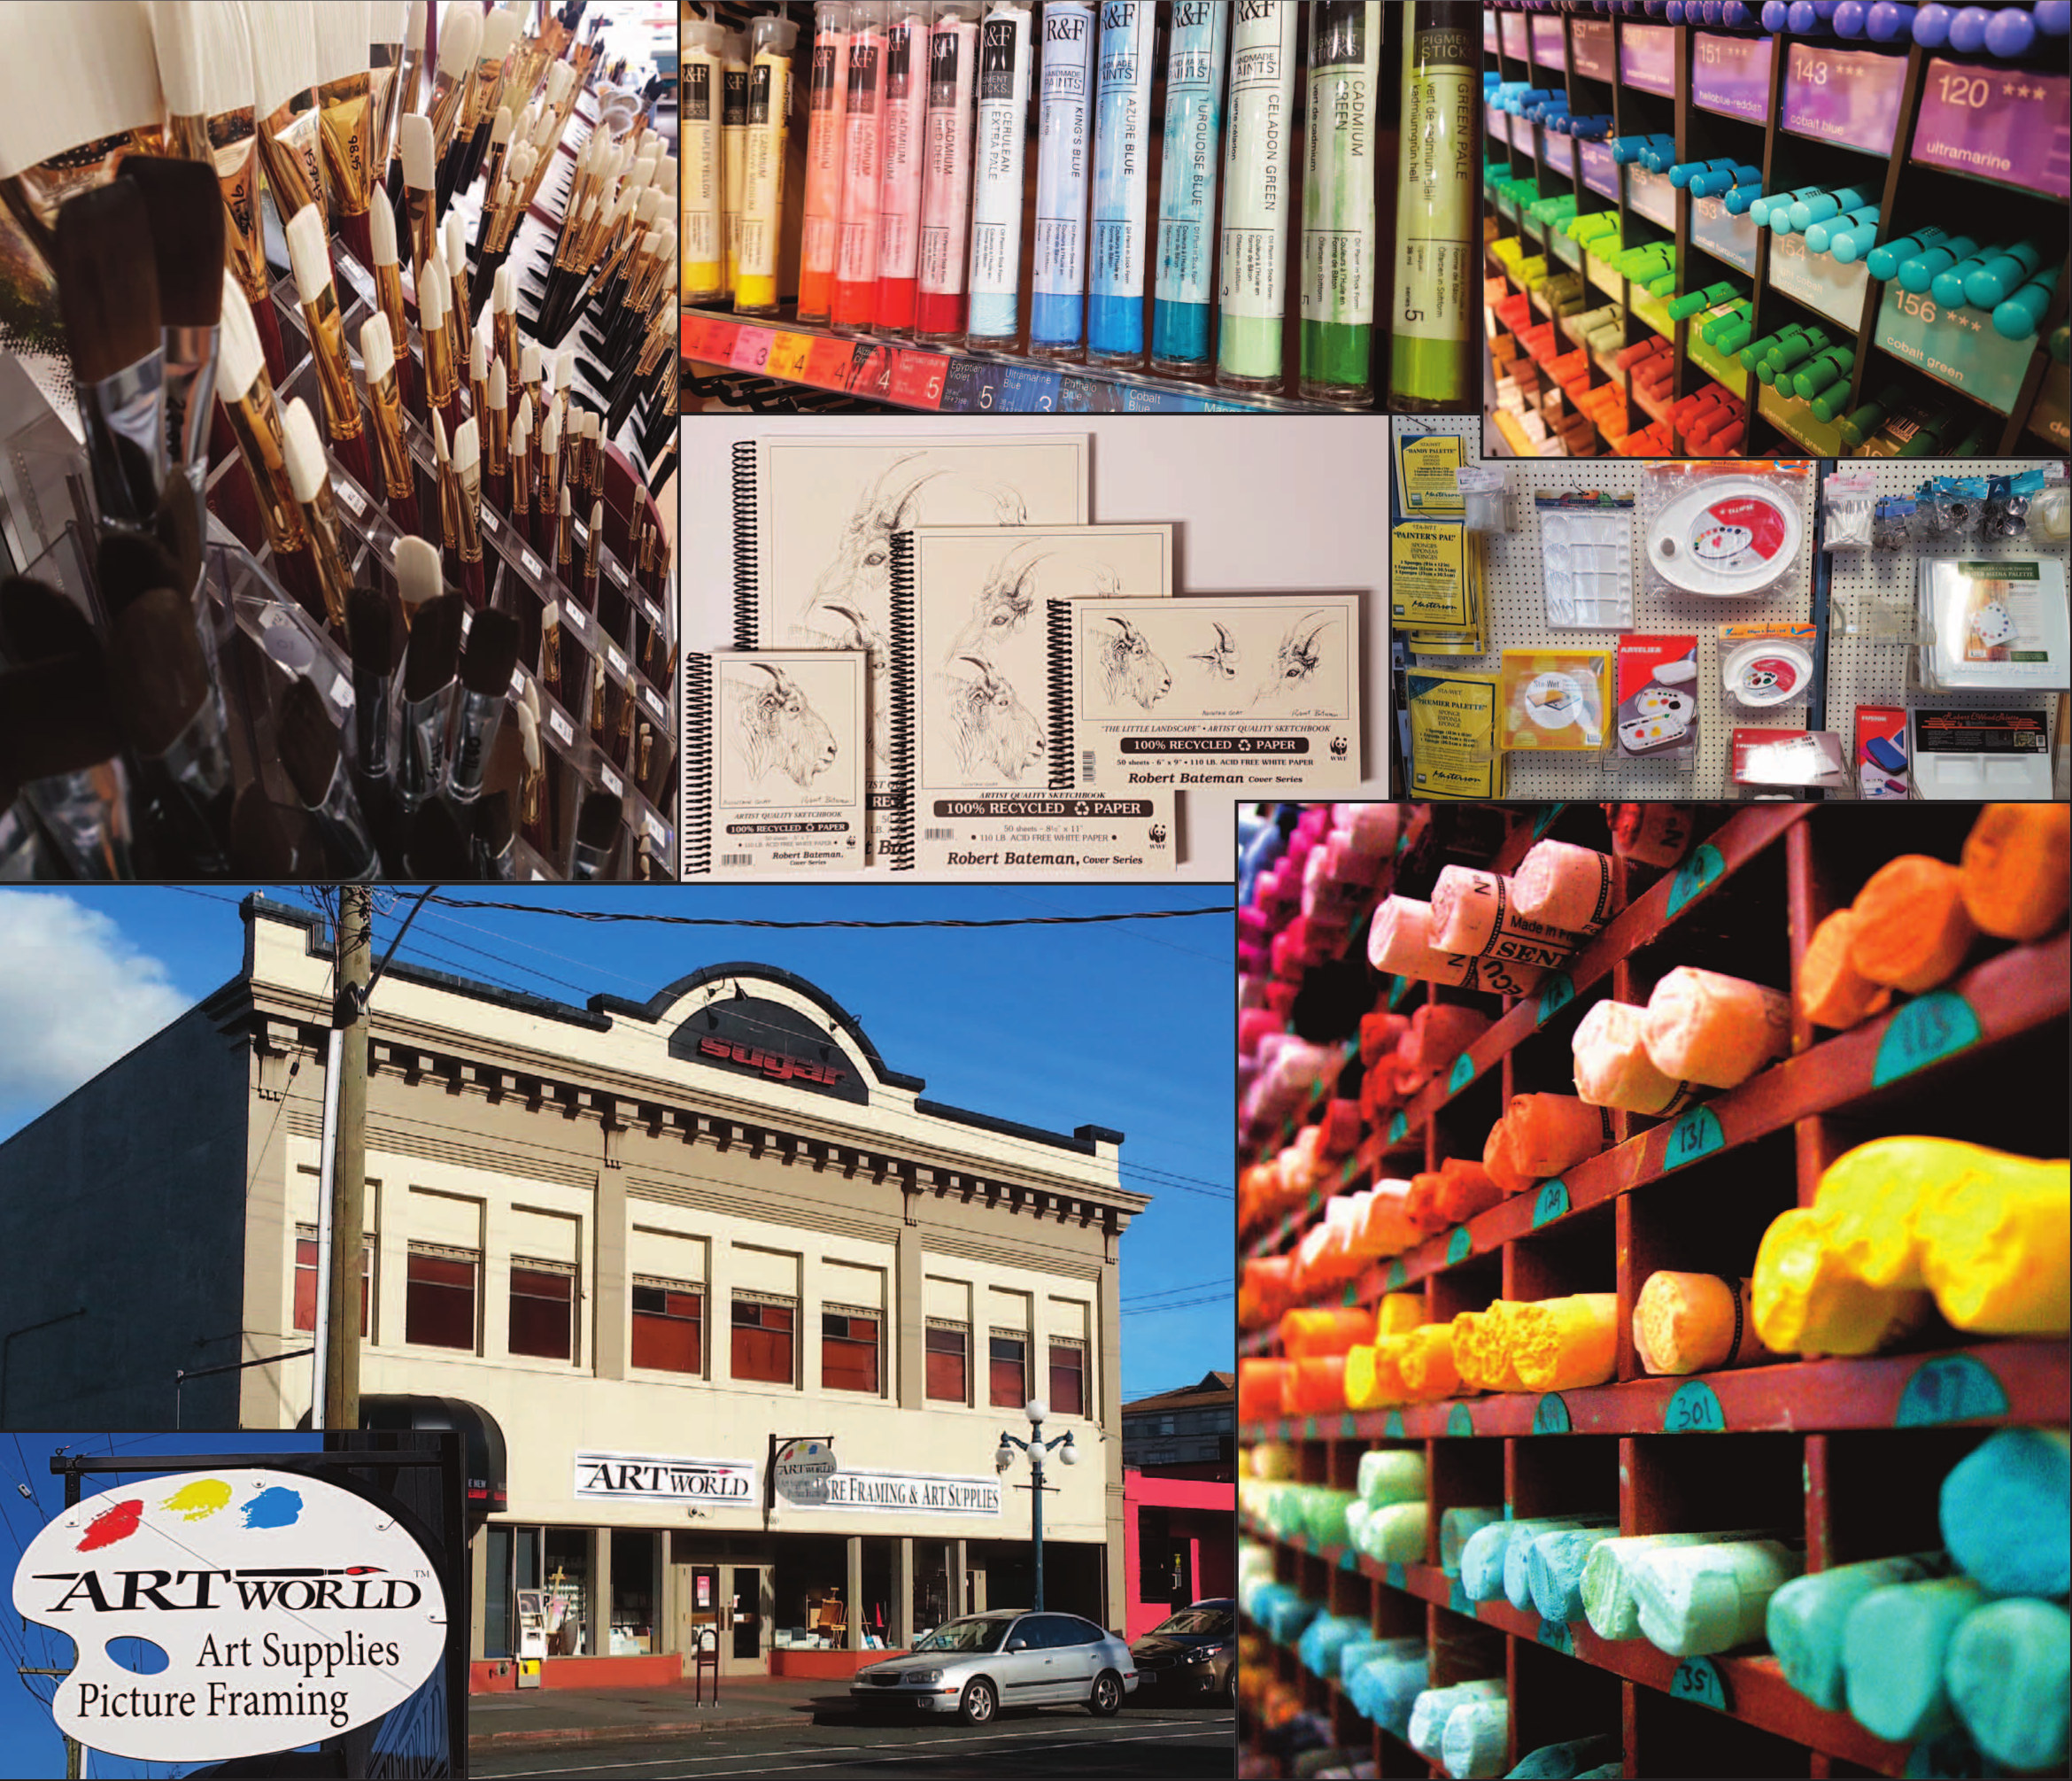 Artworld Picture Framing and Art Supplies - 860 Yates Street Victoria BC V8W 1L8